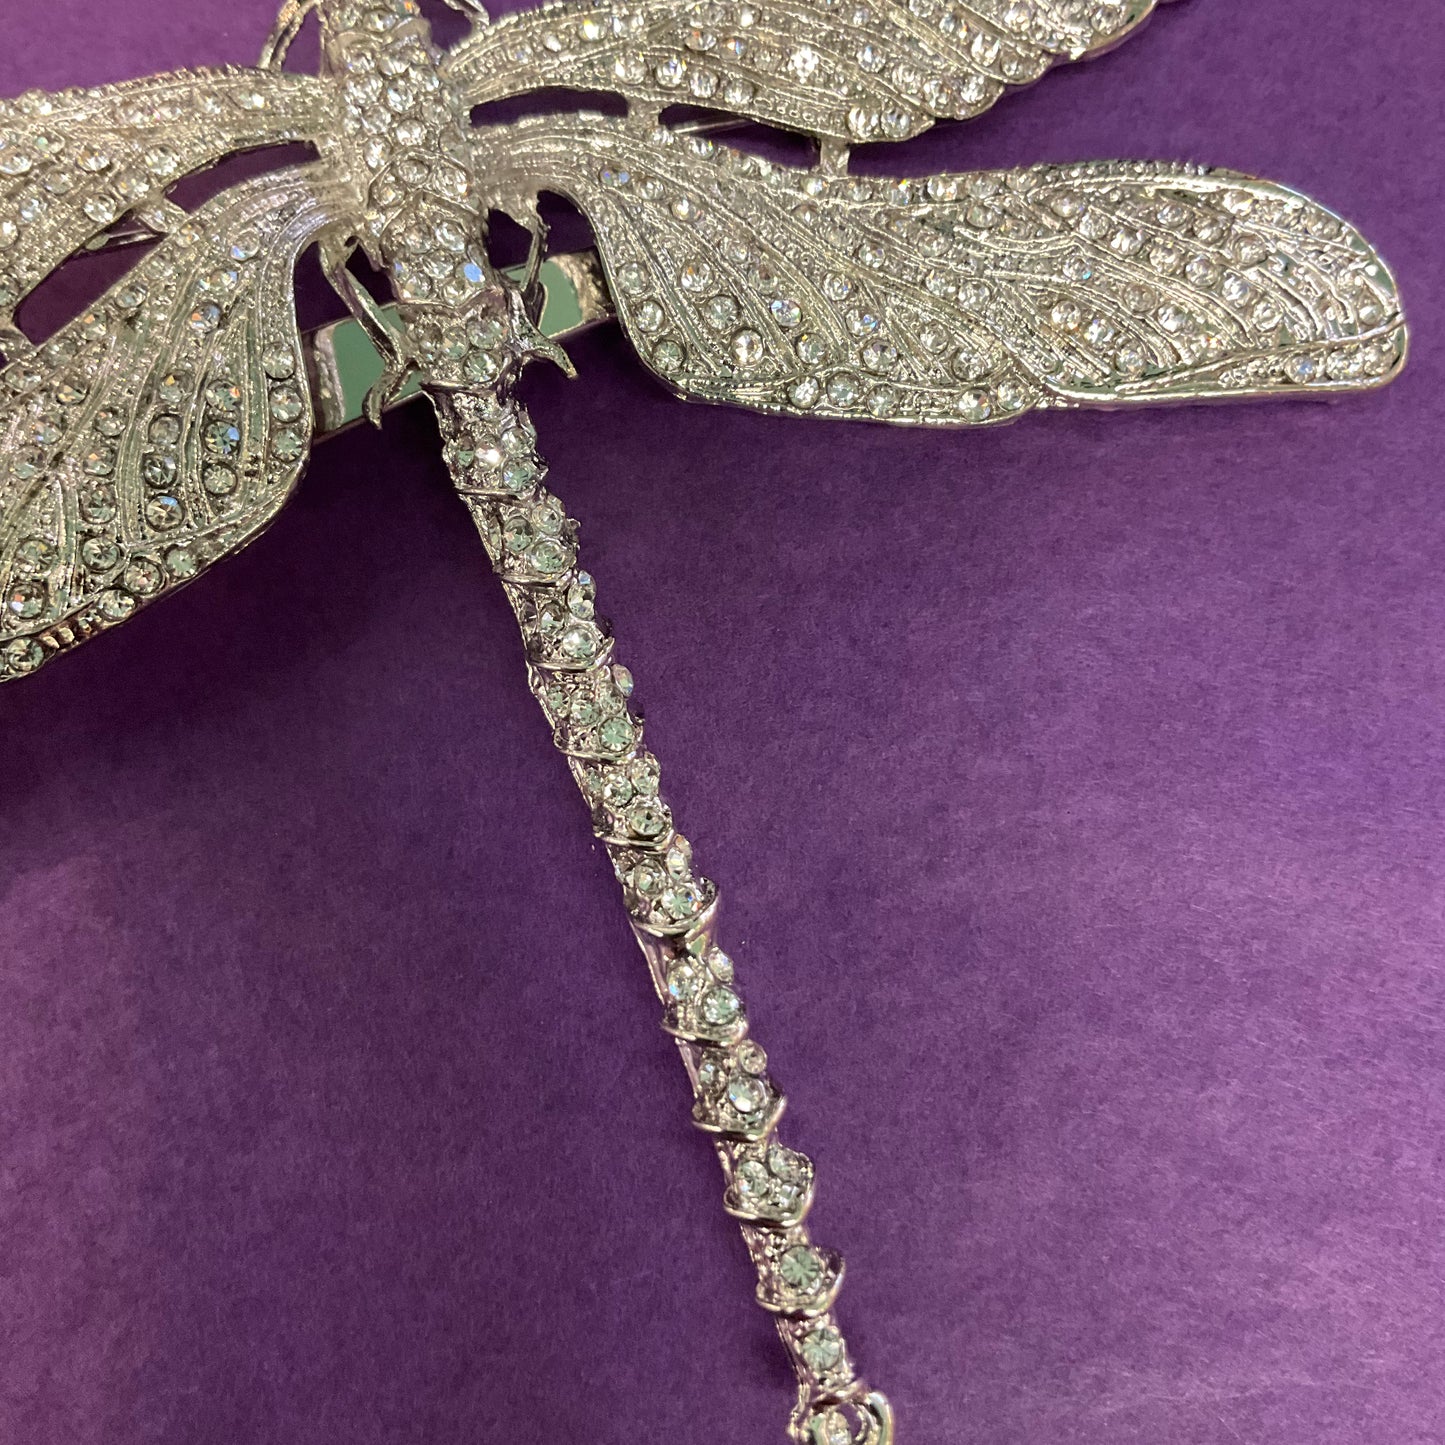 Vintage style oversized Rosie Fox silver crystal Dragonfly Hair clip or Brooch, new with tags, wedding, gift for her